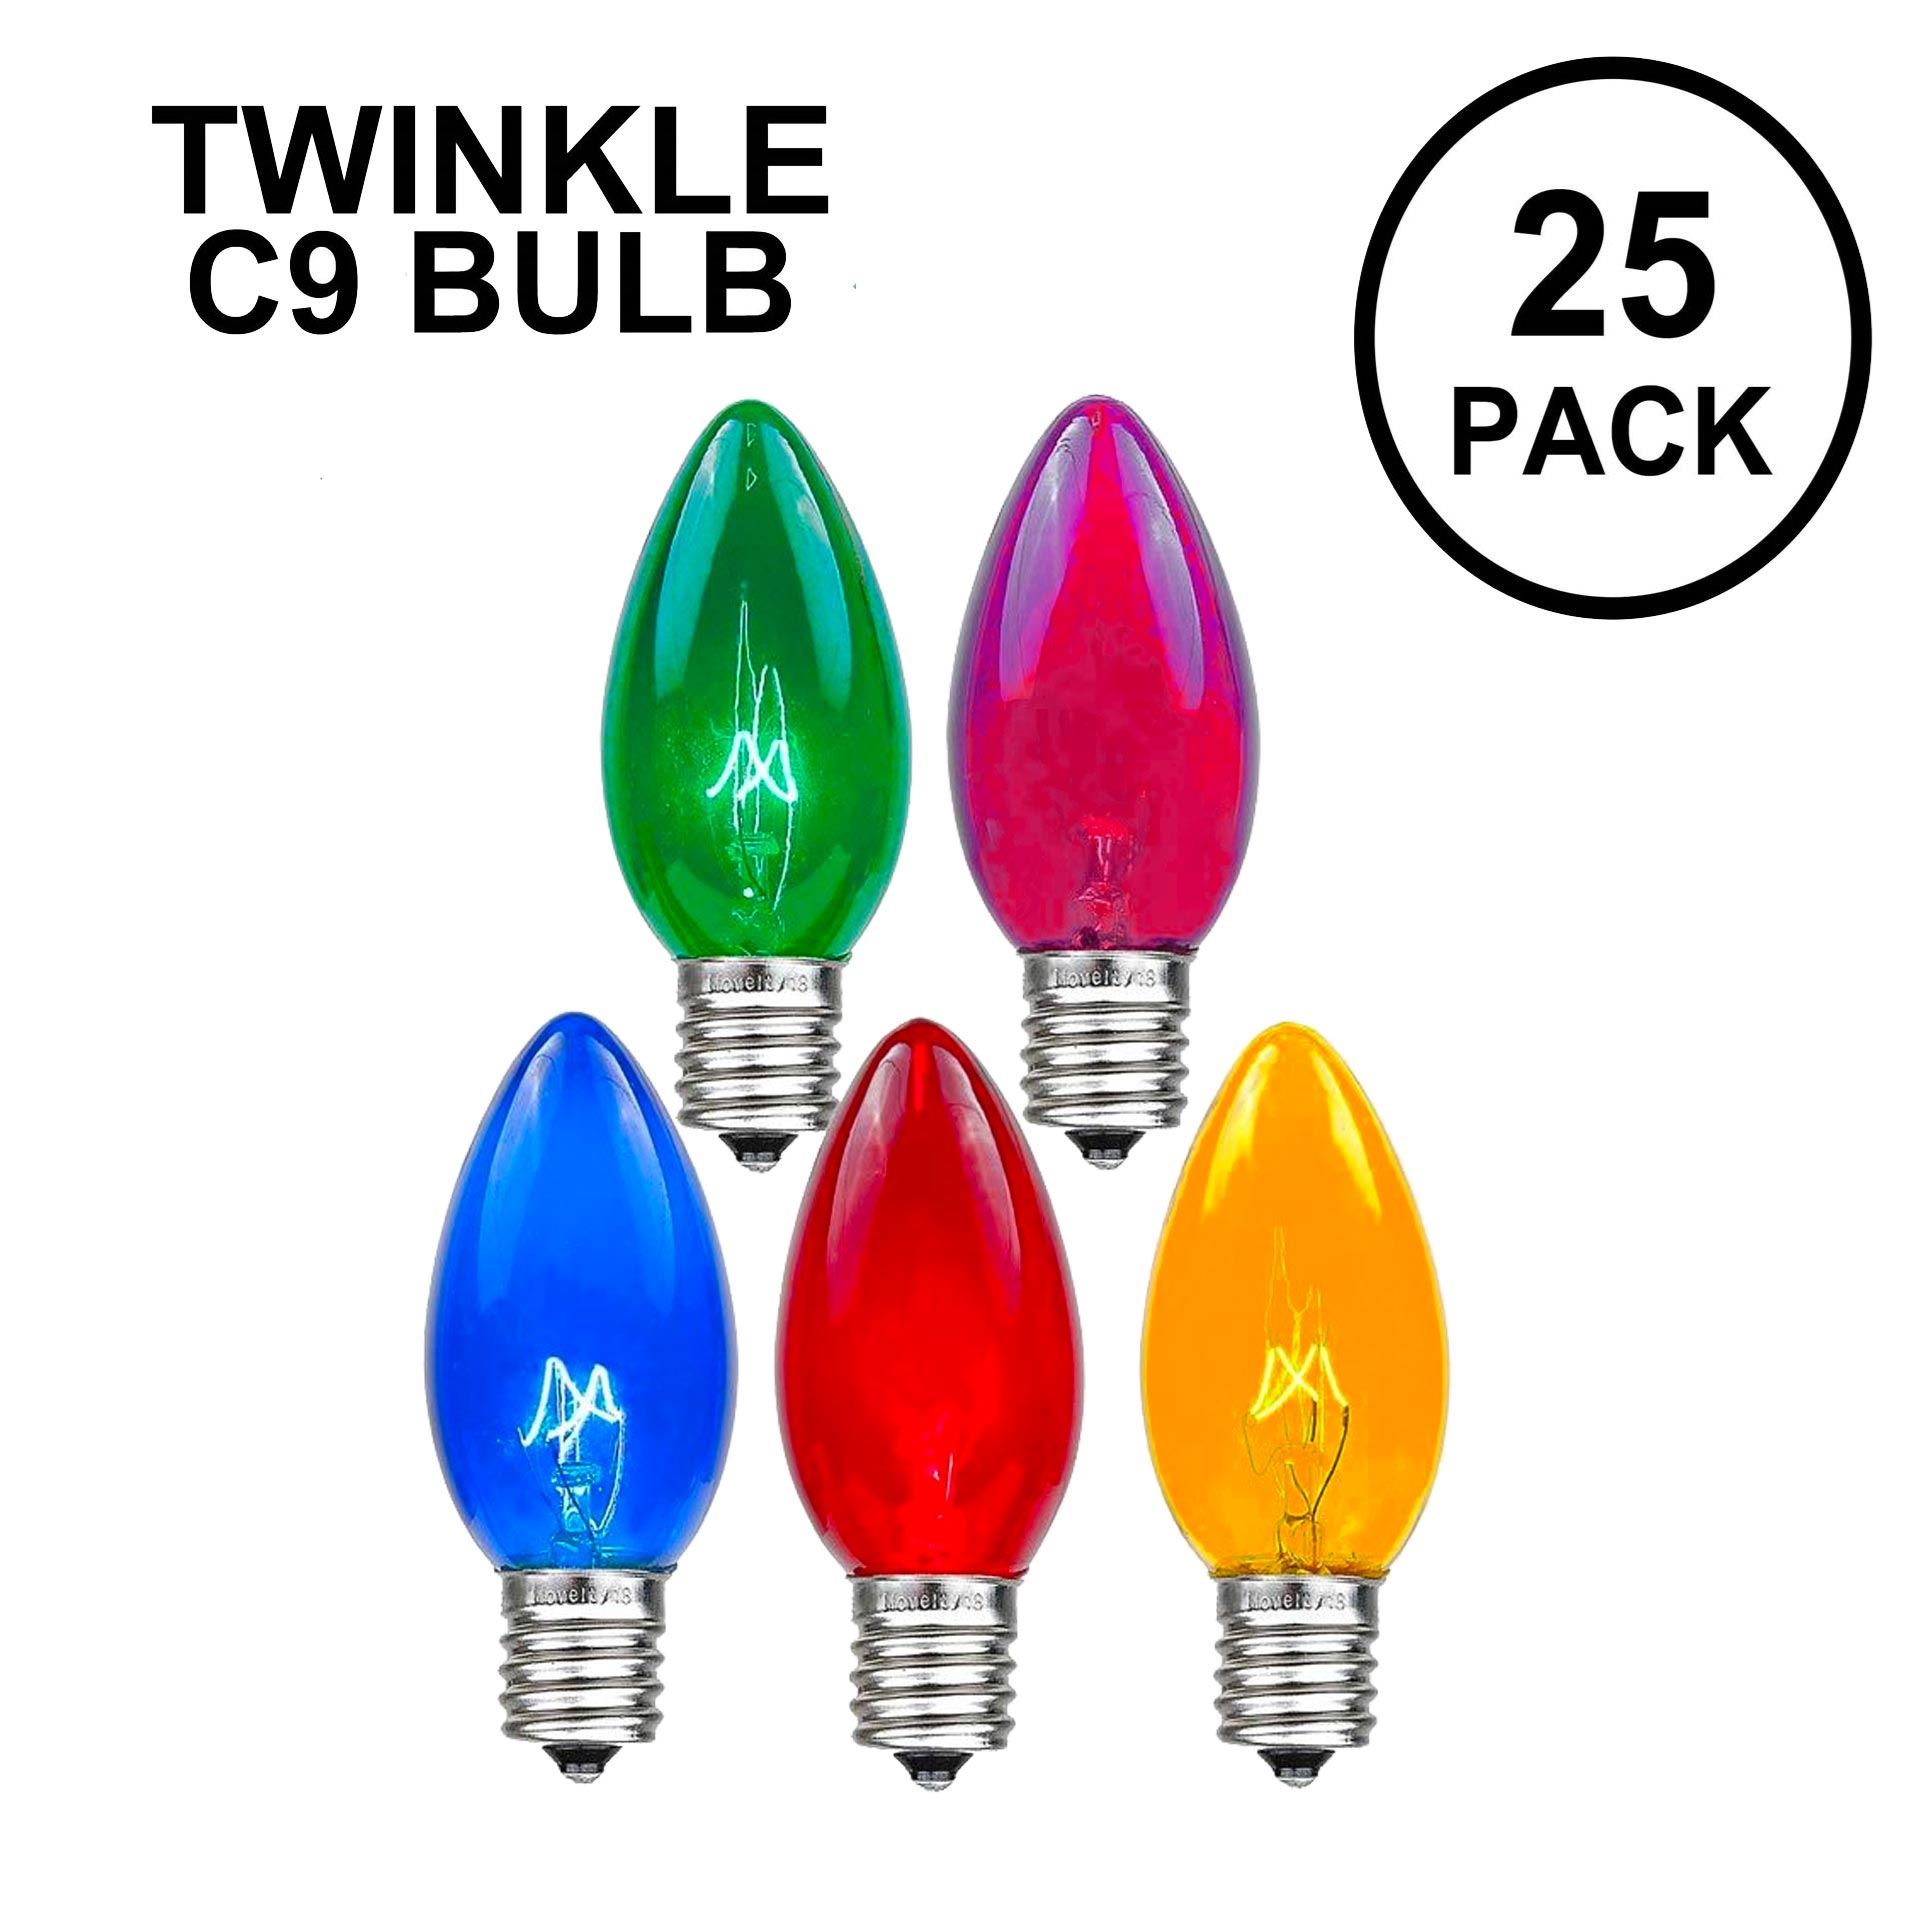 Picture of Assorted Twinkle C9 Bulbs 7 Watt Replacement Lamps 25 Pack